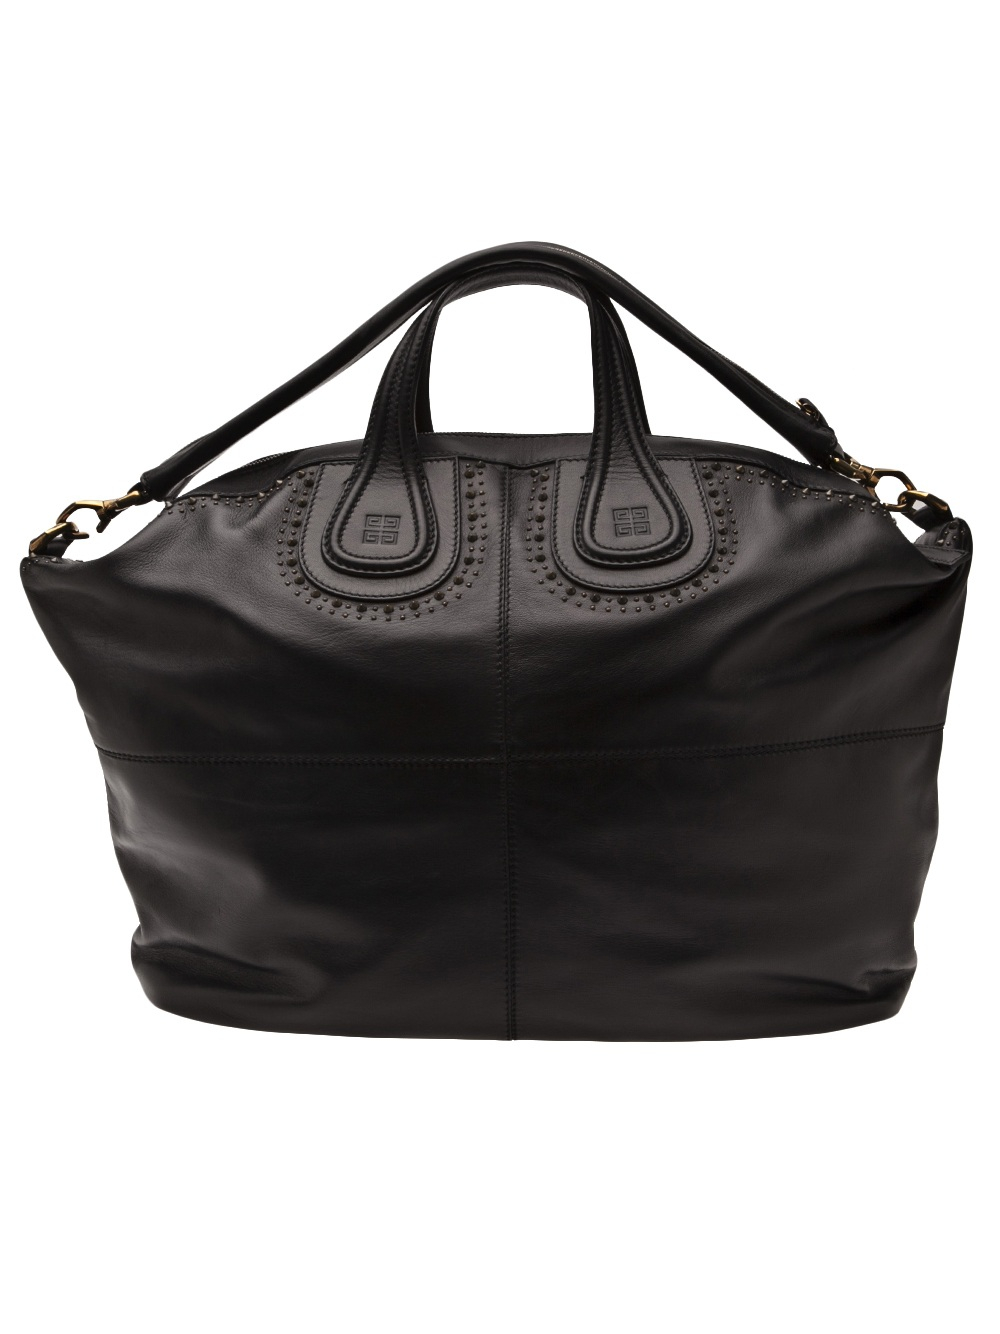 Givenchy Is Reintroducing the Nightingale Bag